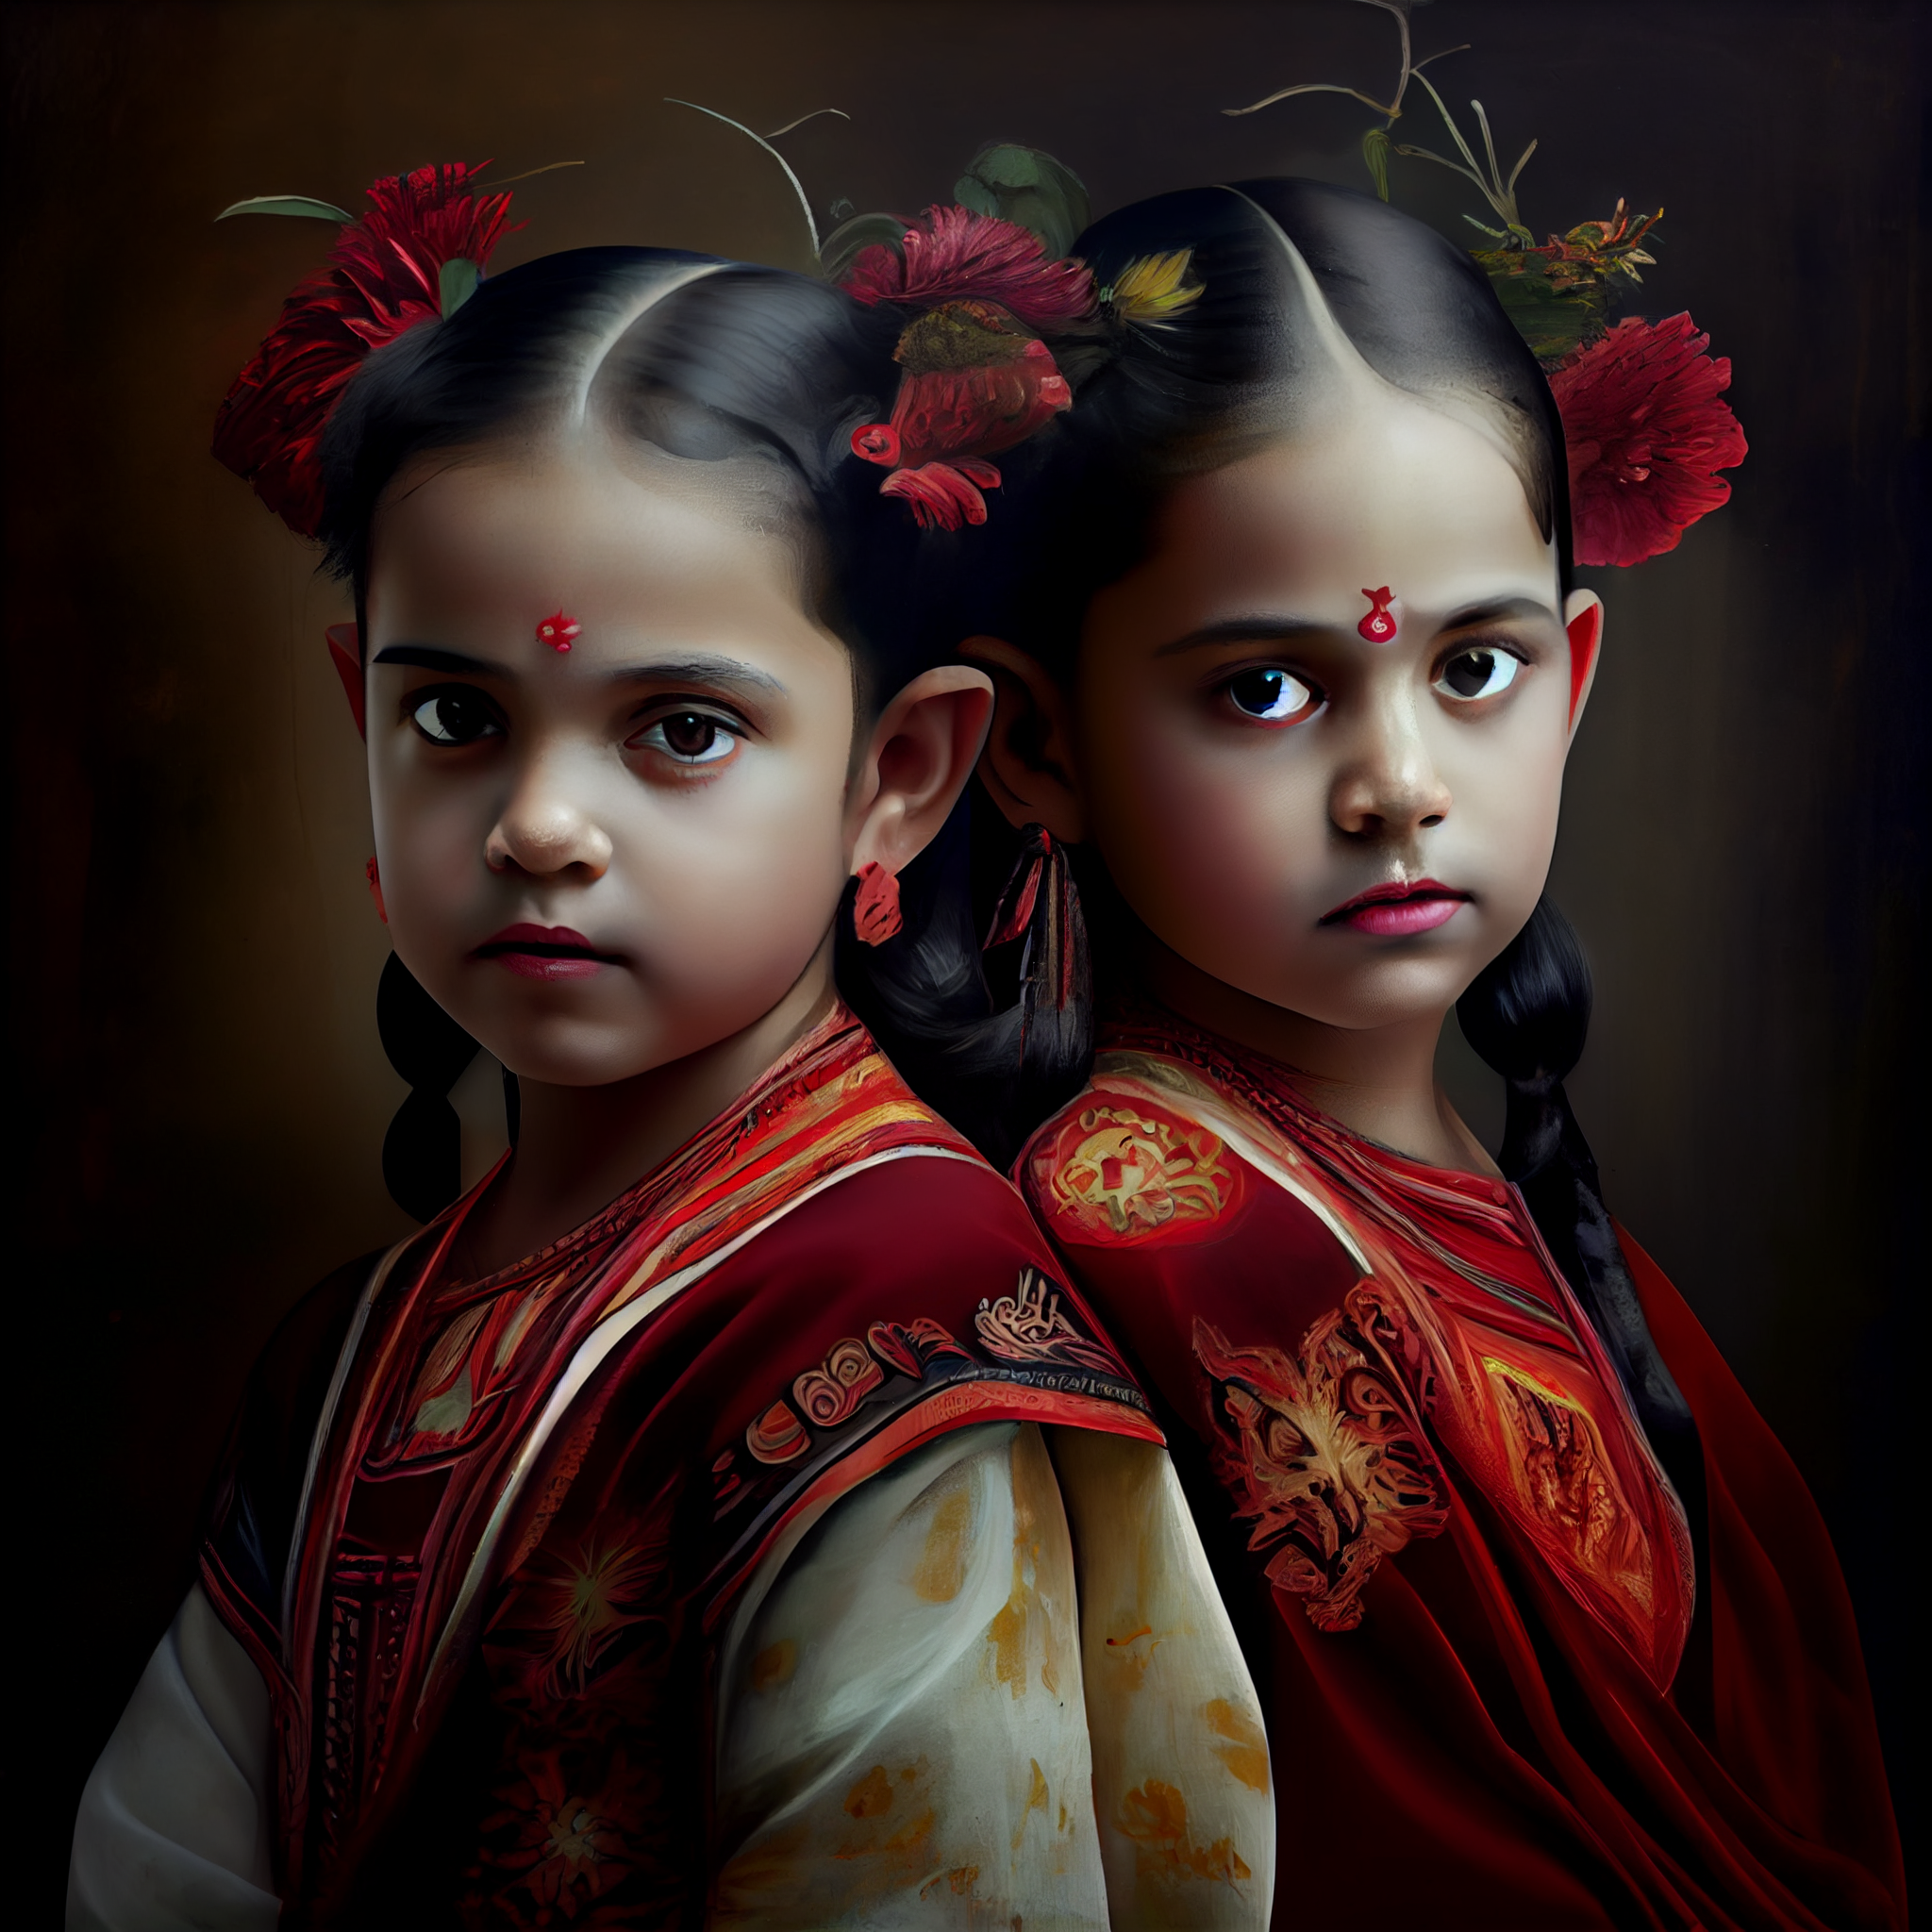 "Sisters in Tradition: A Beautiful Art Print of Two Little Indian Girls in Red and White"